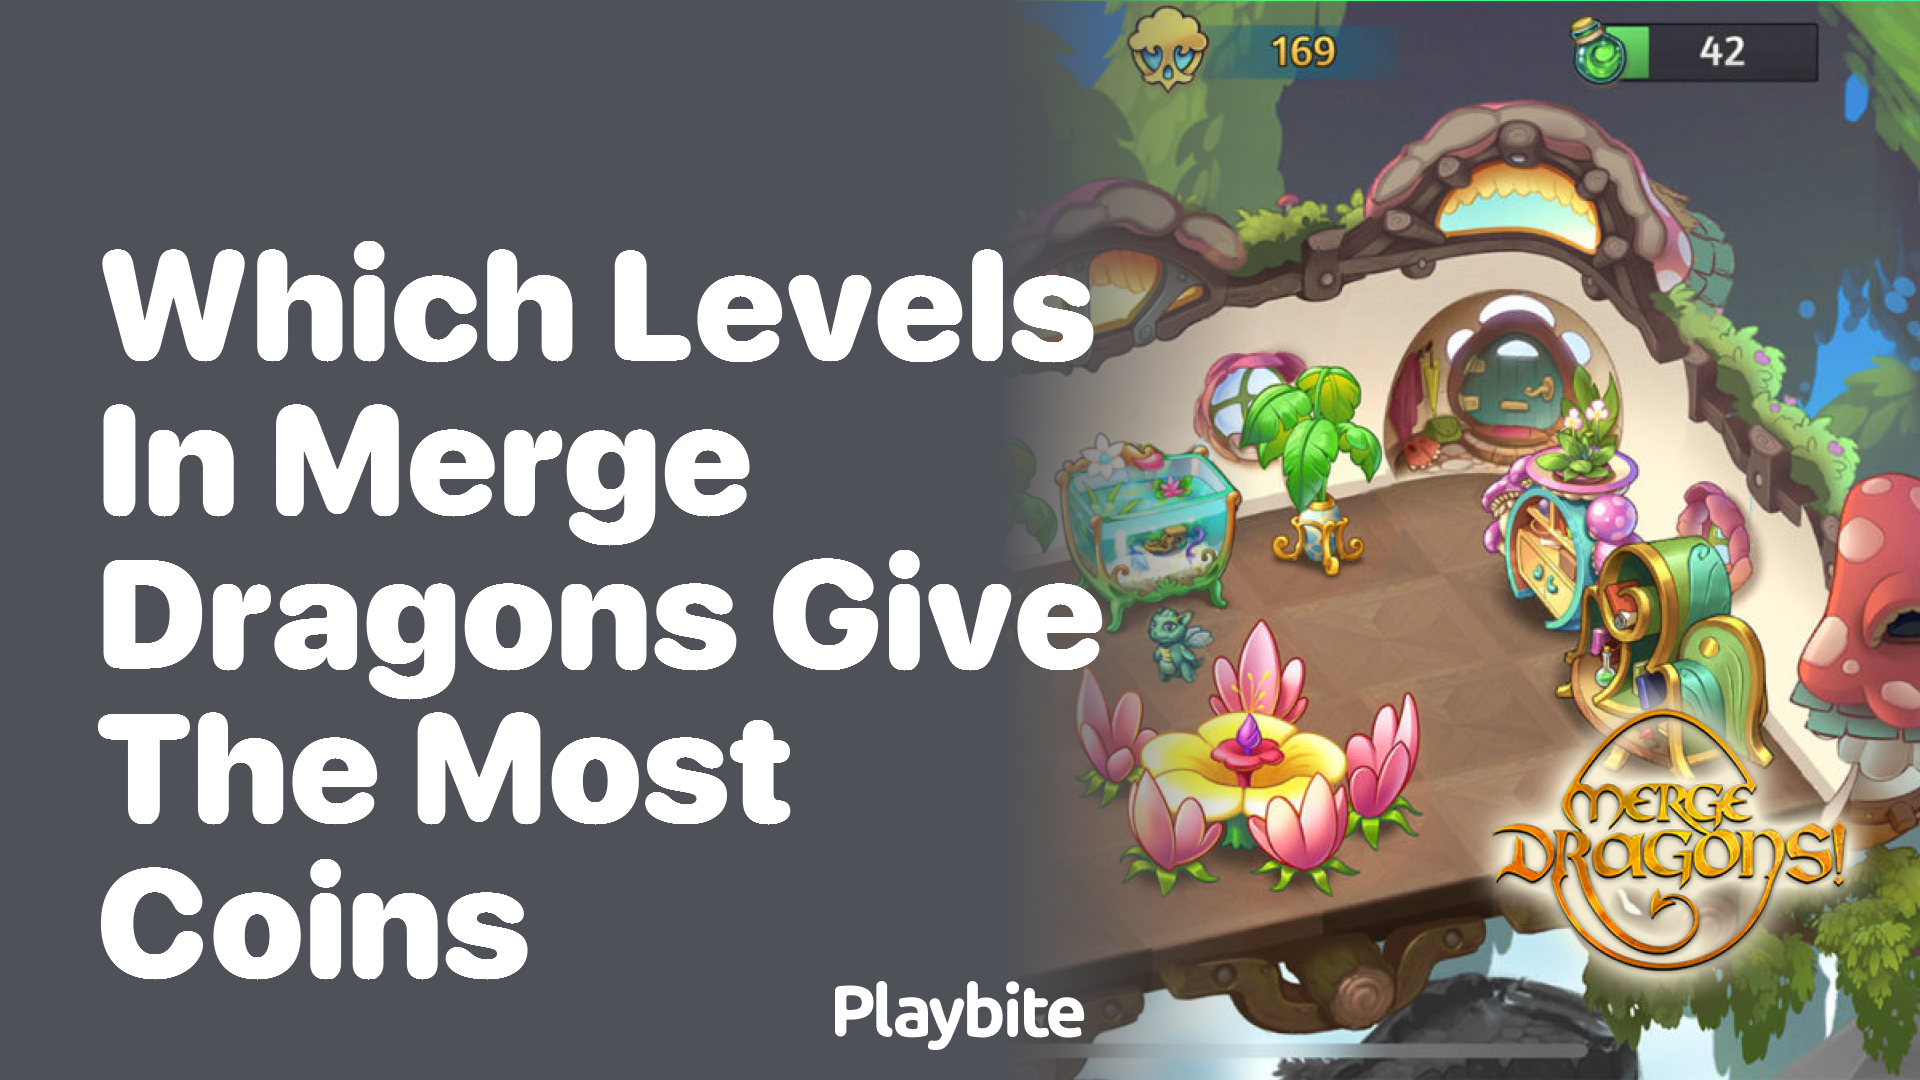 Which Levels in Merge Dragons Give the Most Coins?